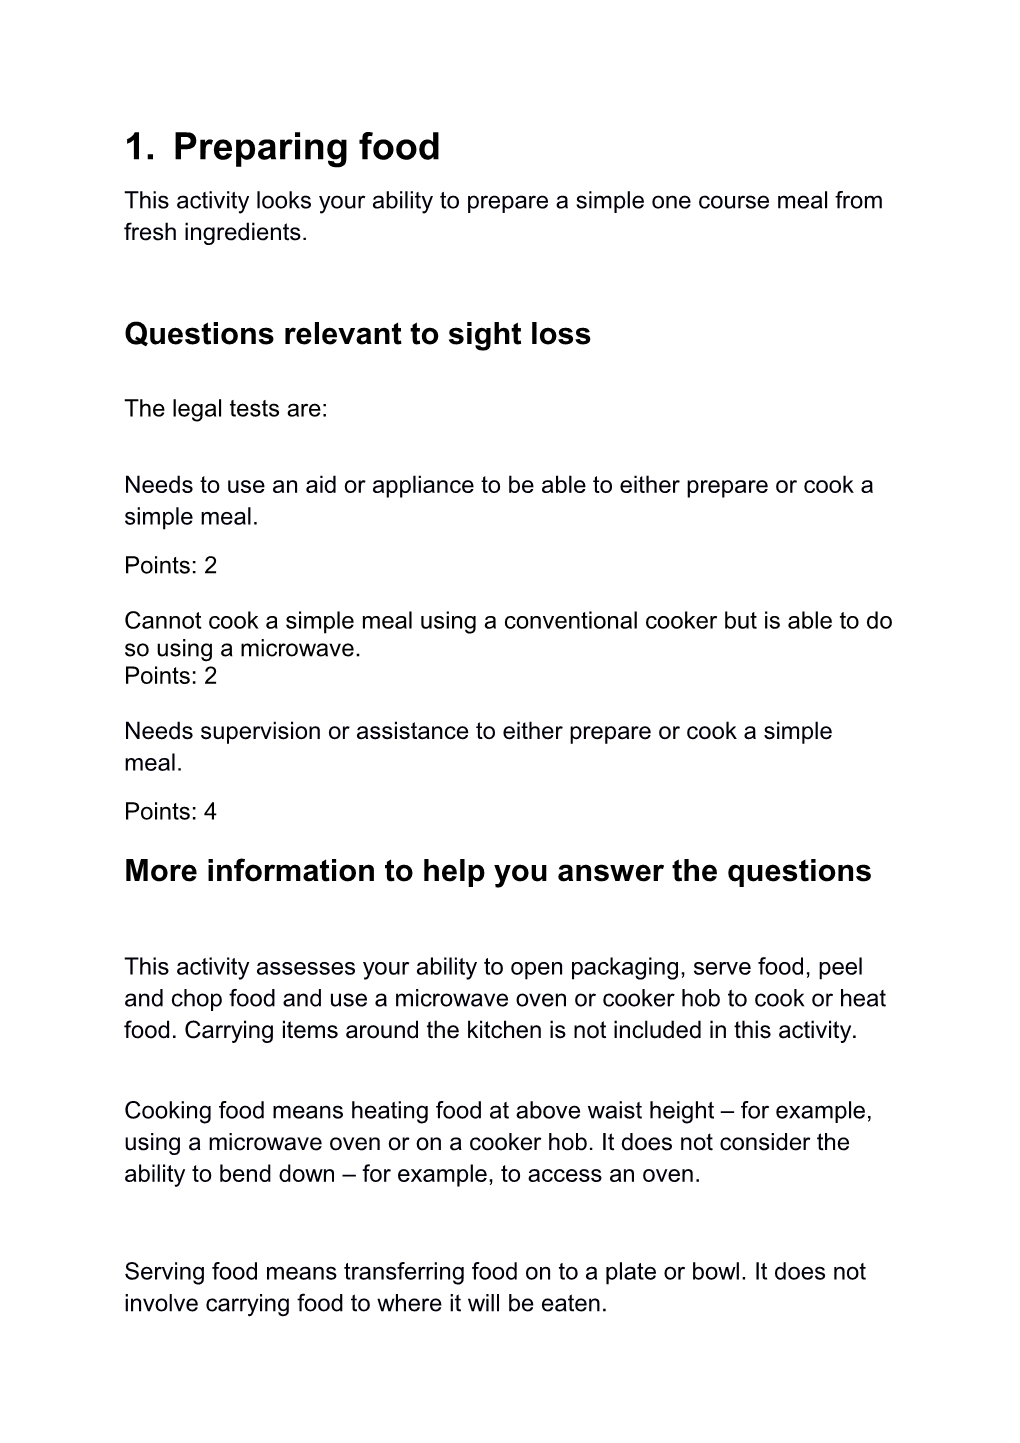 Questions Relevant to Sight Loss